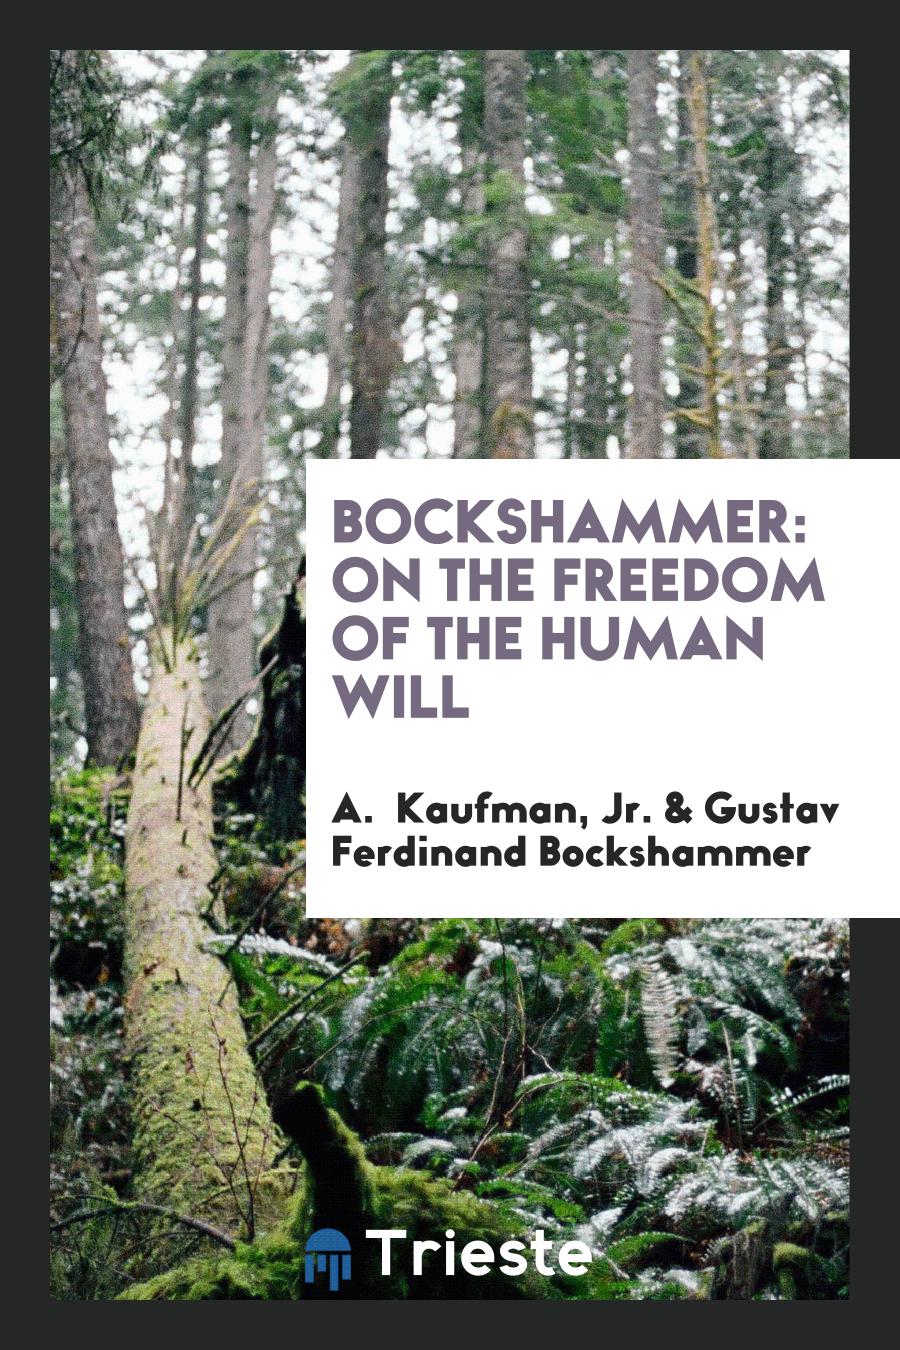 Bockshammer: On the Freedom of the Human Will